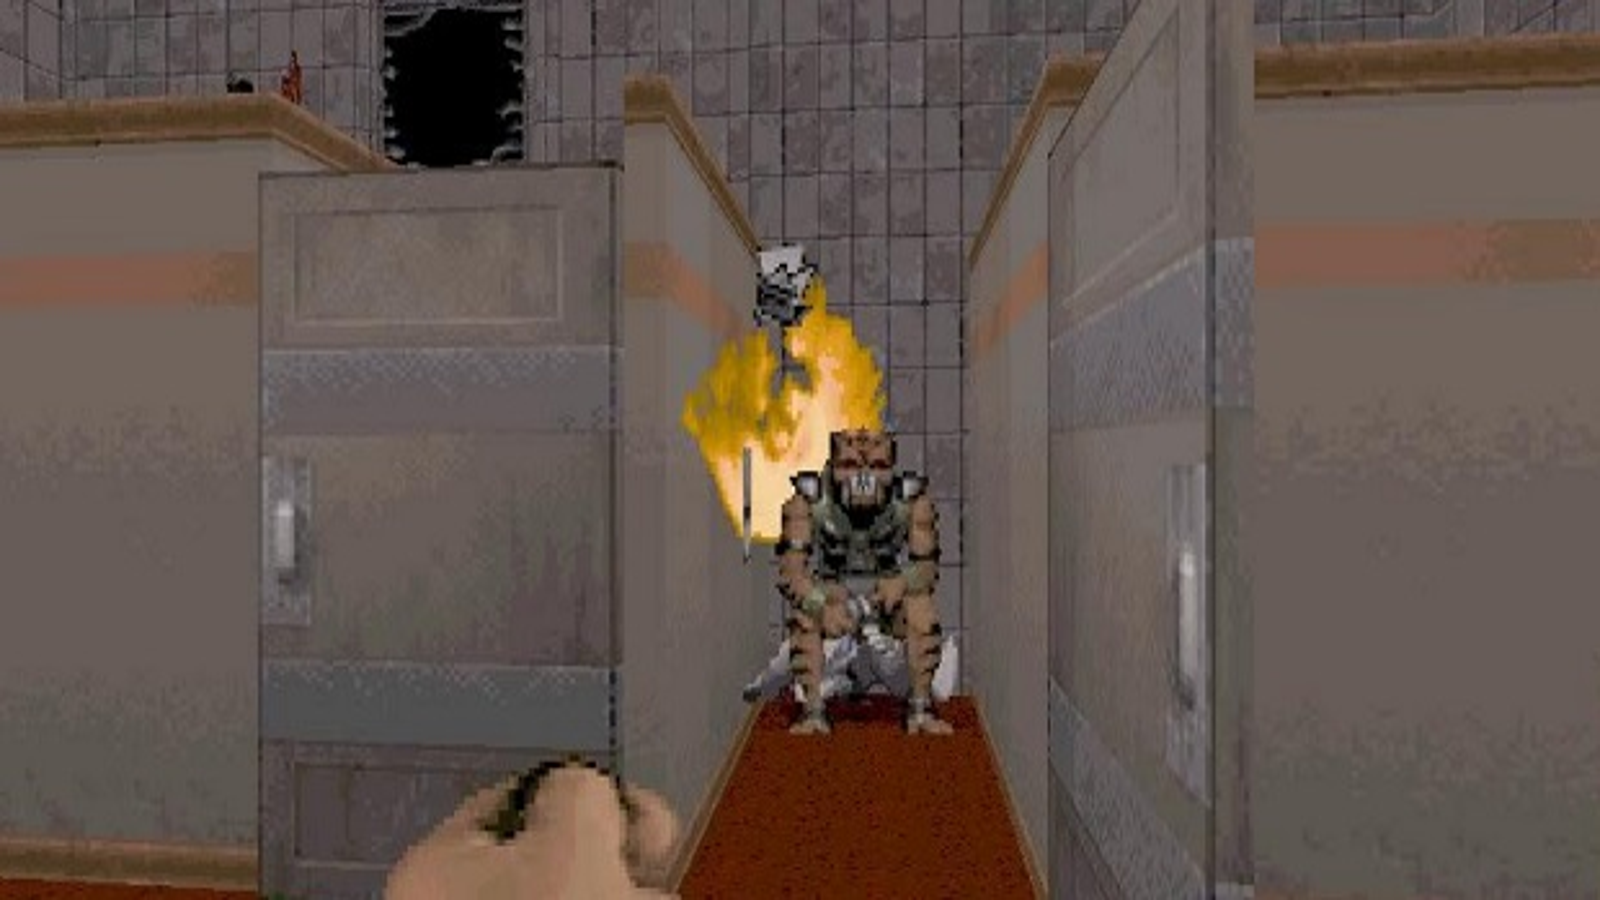 Duke Nukem 3D is still one of the best all time classics : r/gaming